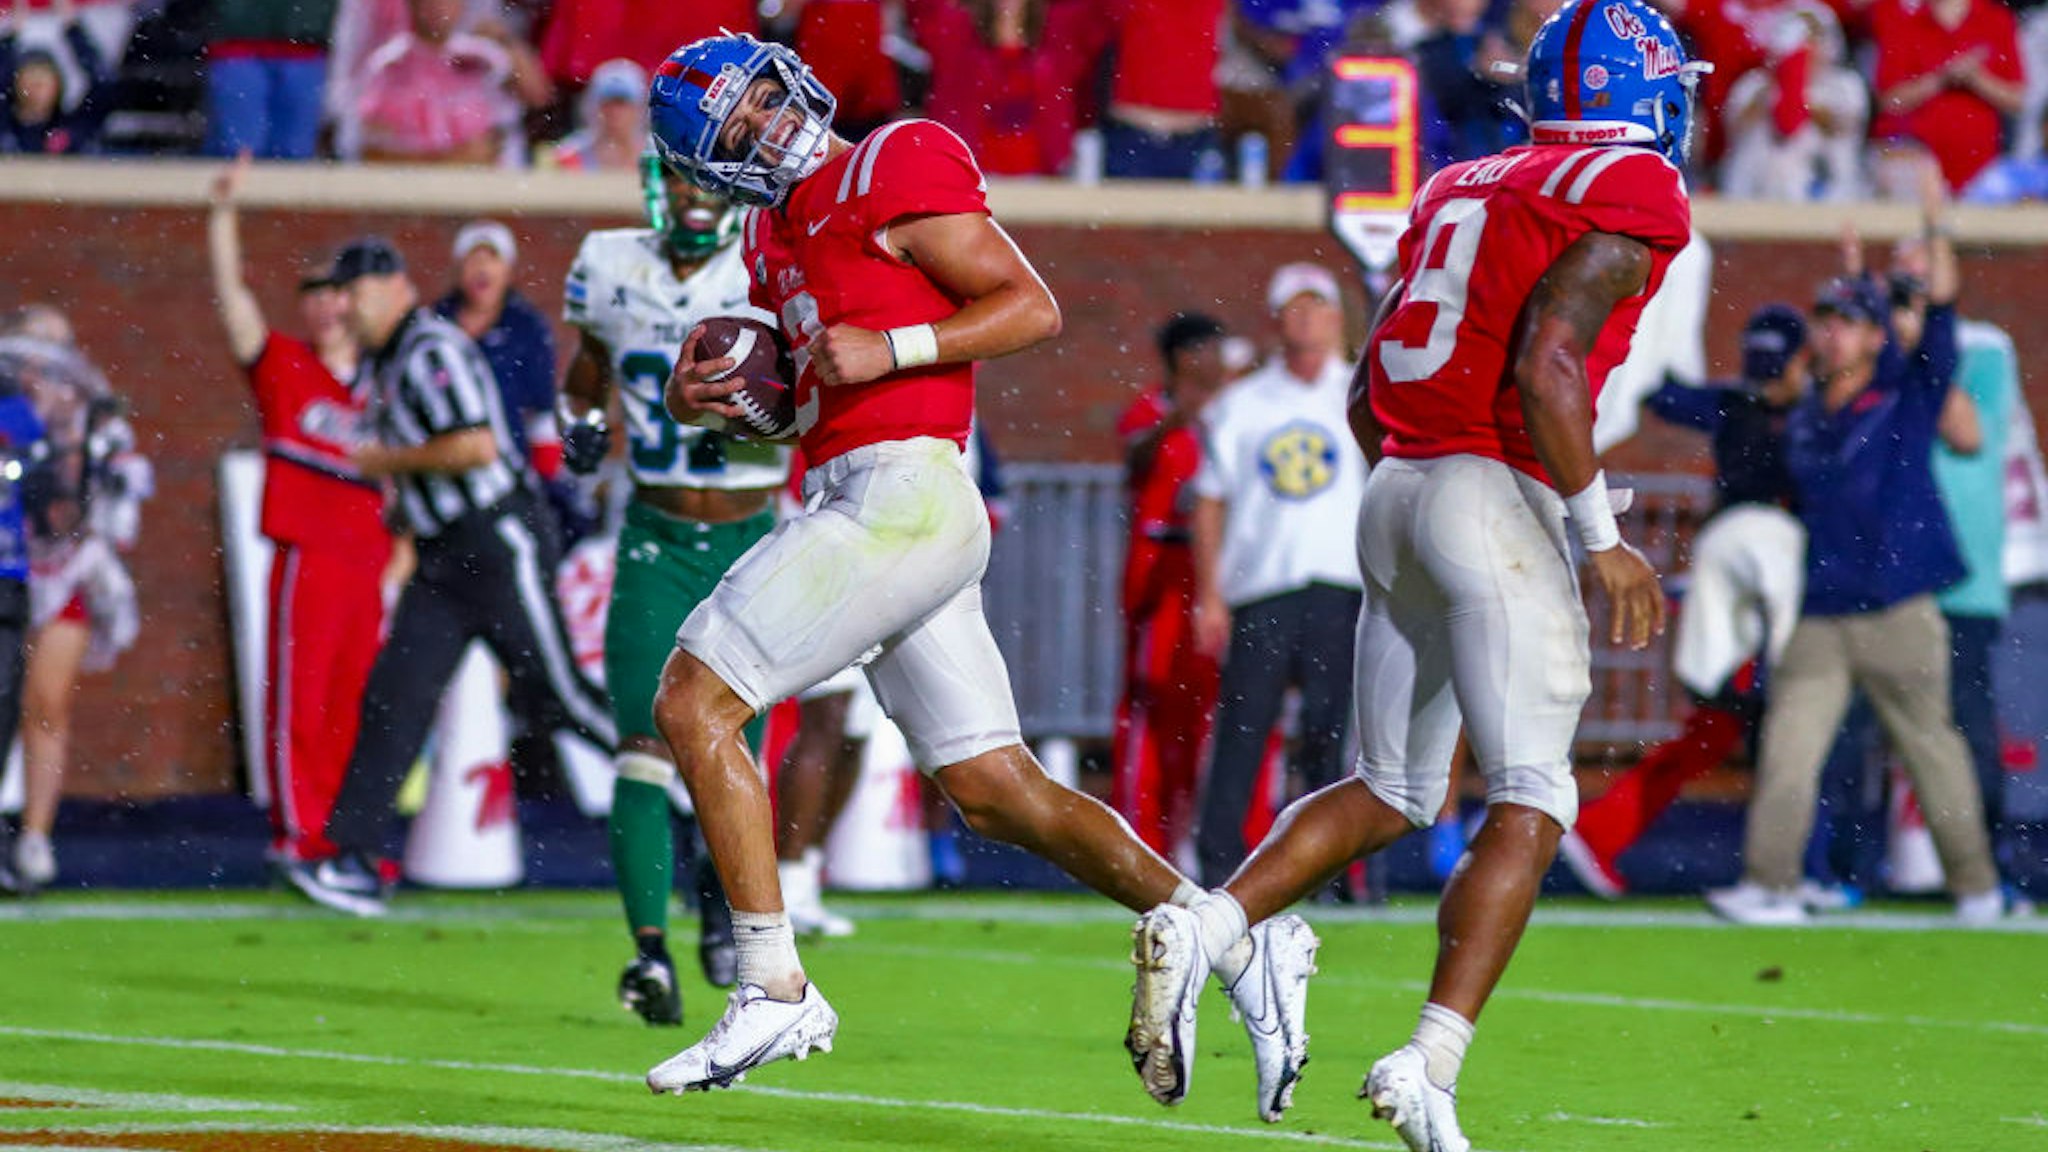 OXFORD, MS - SEPTEMBER 18: Ole Miss Rebels quarterback Matt Corral celebrates while scoring a touchdown during the college football game between the Ole Miss Rebels and the Tulane Green Wave on September 18, 2021, at Vaught-Hemingway Stadium in Oxford, MS. (Photo by Chris McDill/Icon Sportswire via Getty Images)